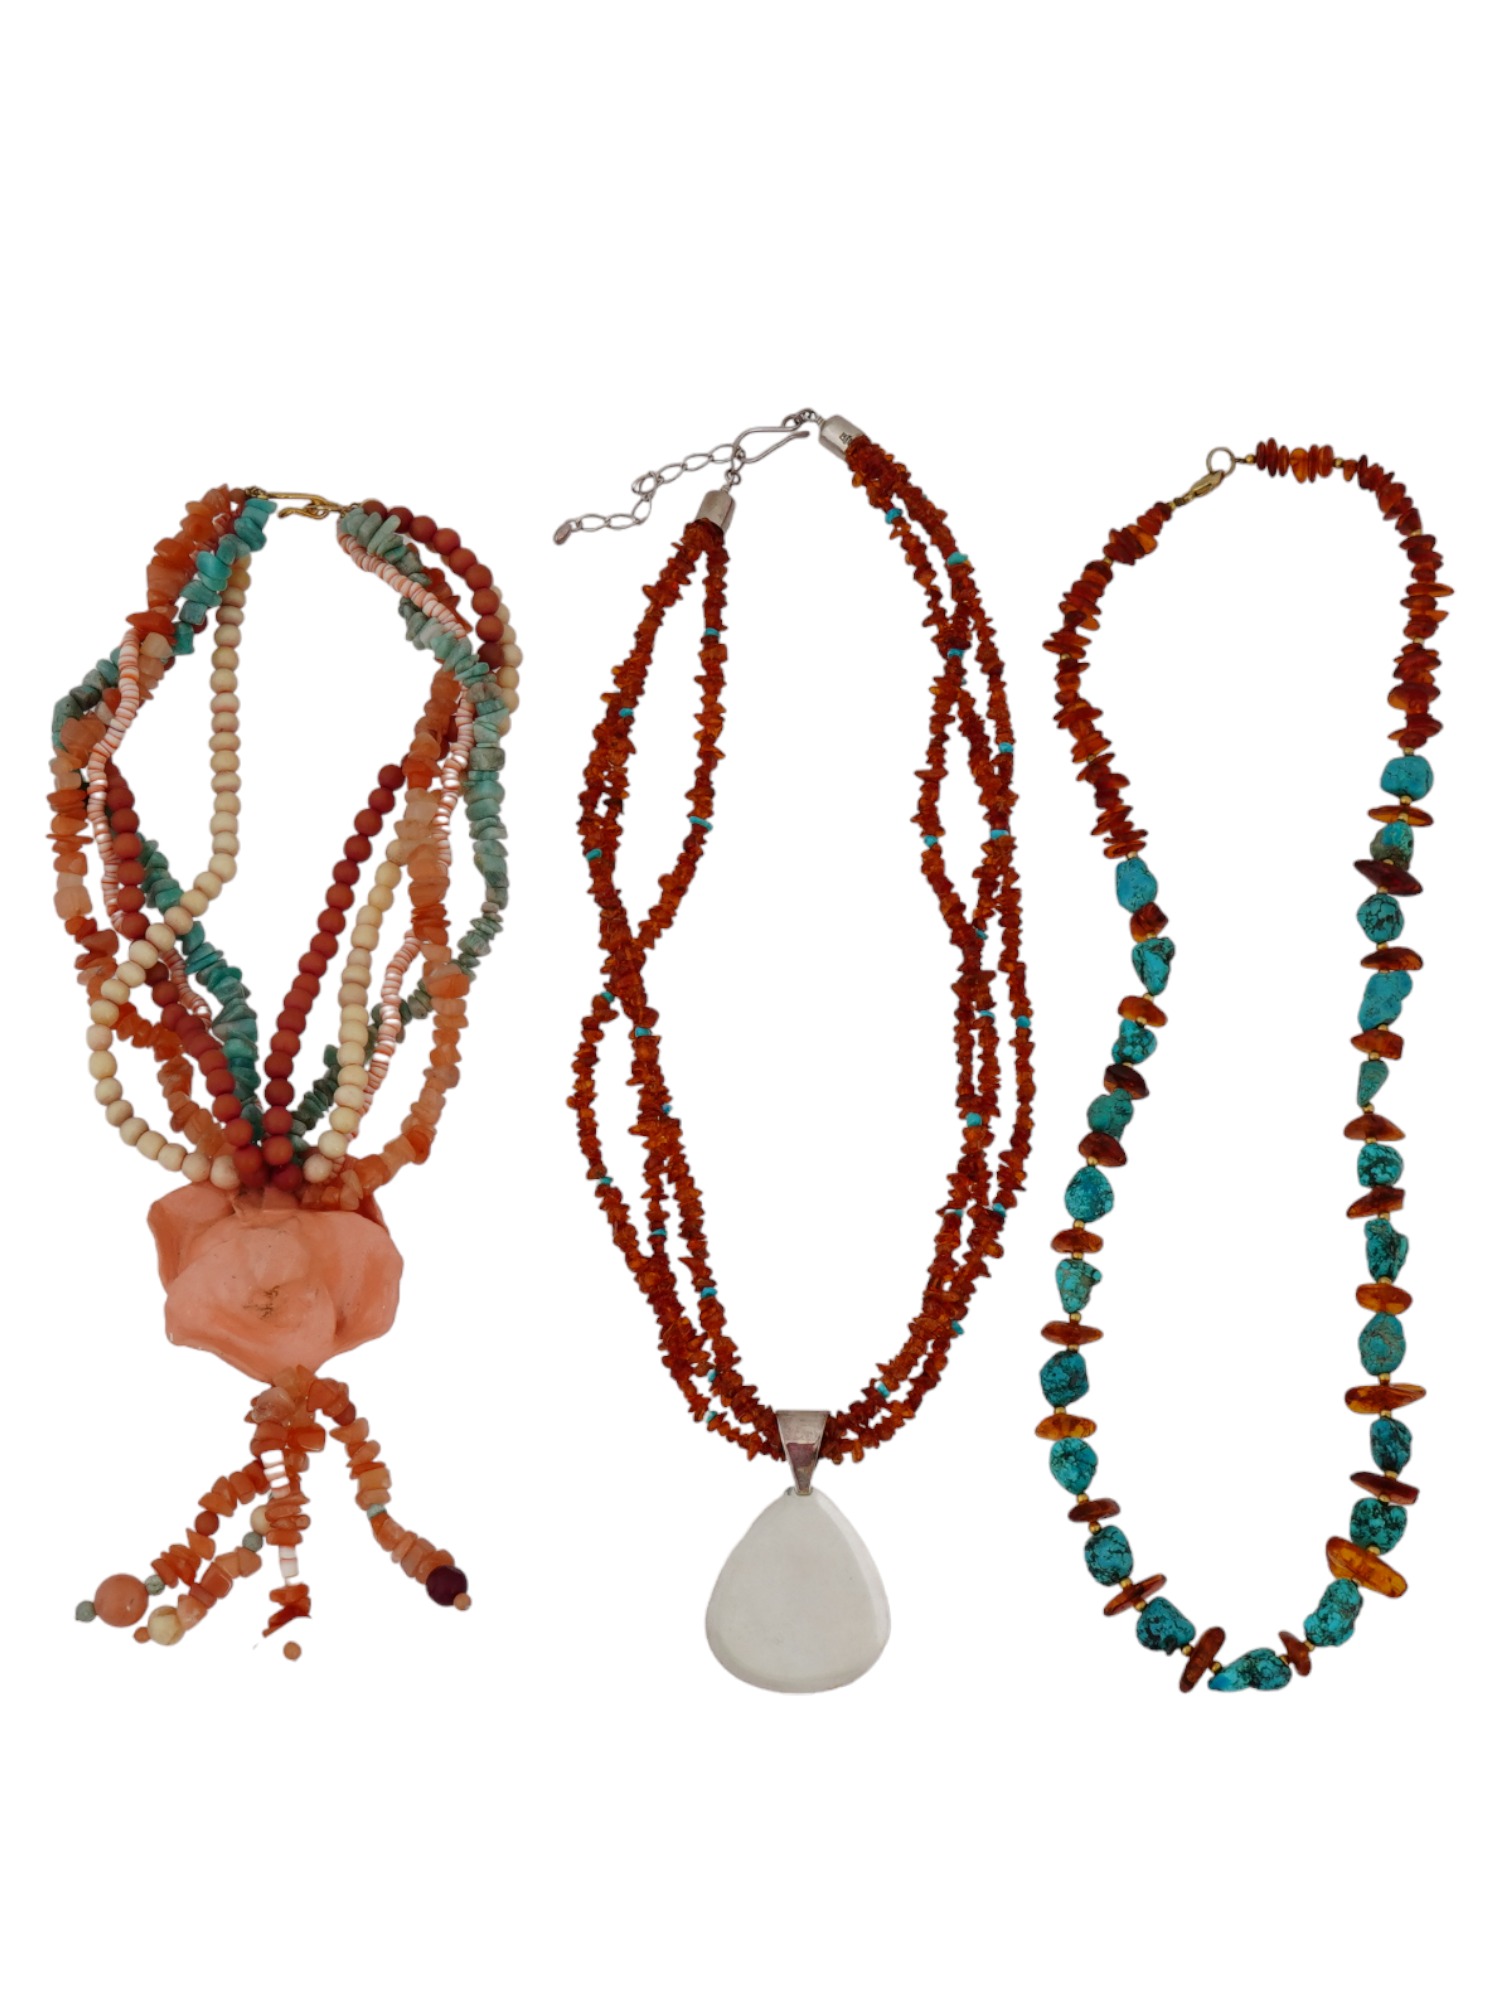 SOUTHWESTERN AMERICAN AMBER TURQUOISE NECKLACES PIC-1